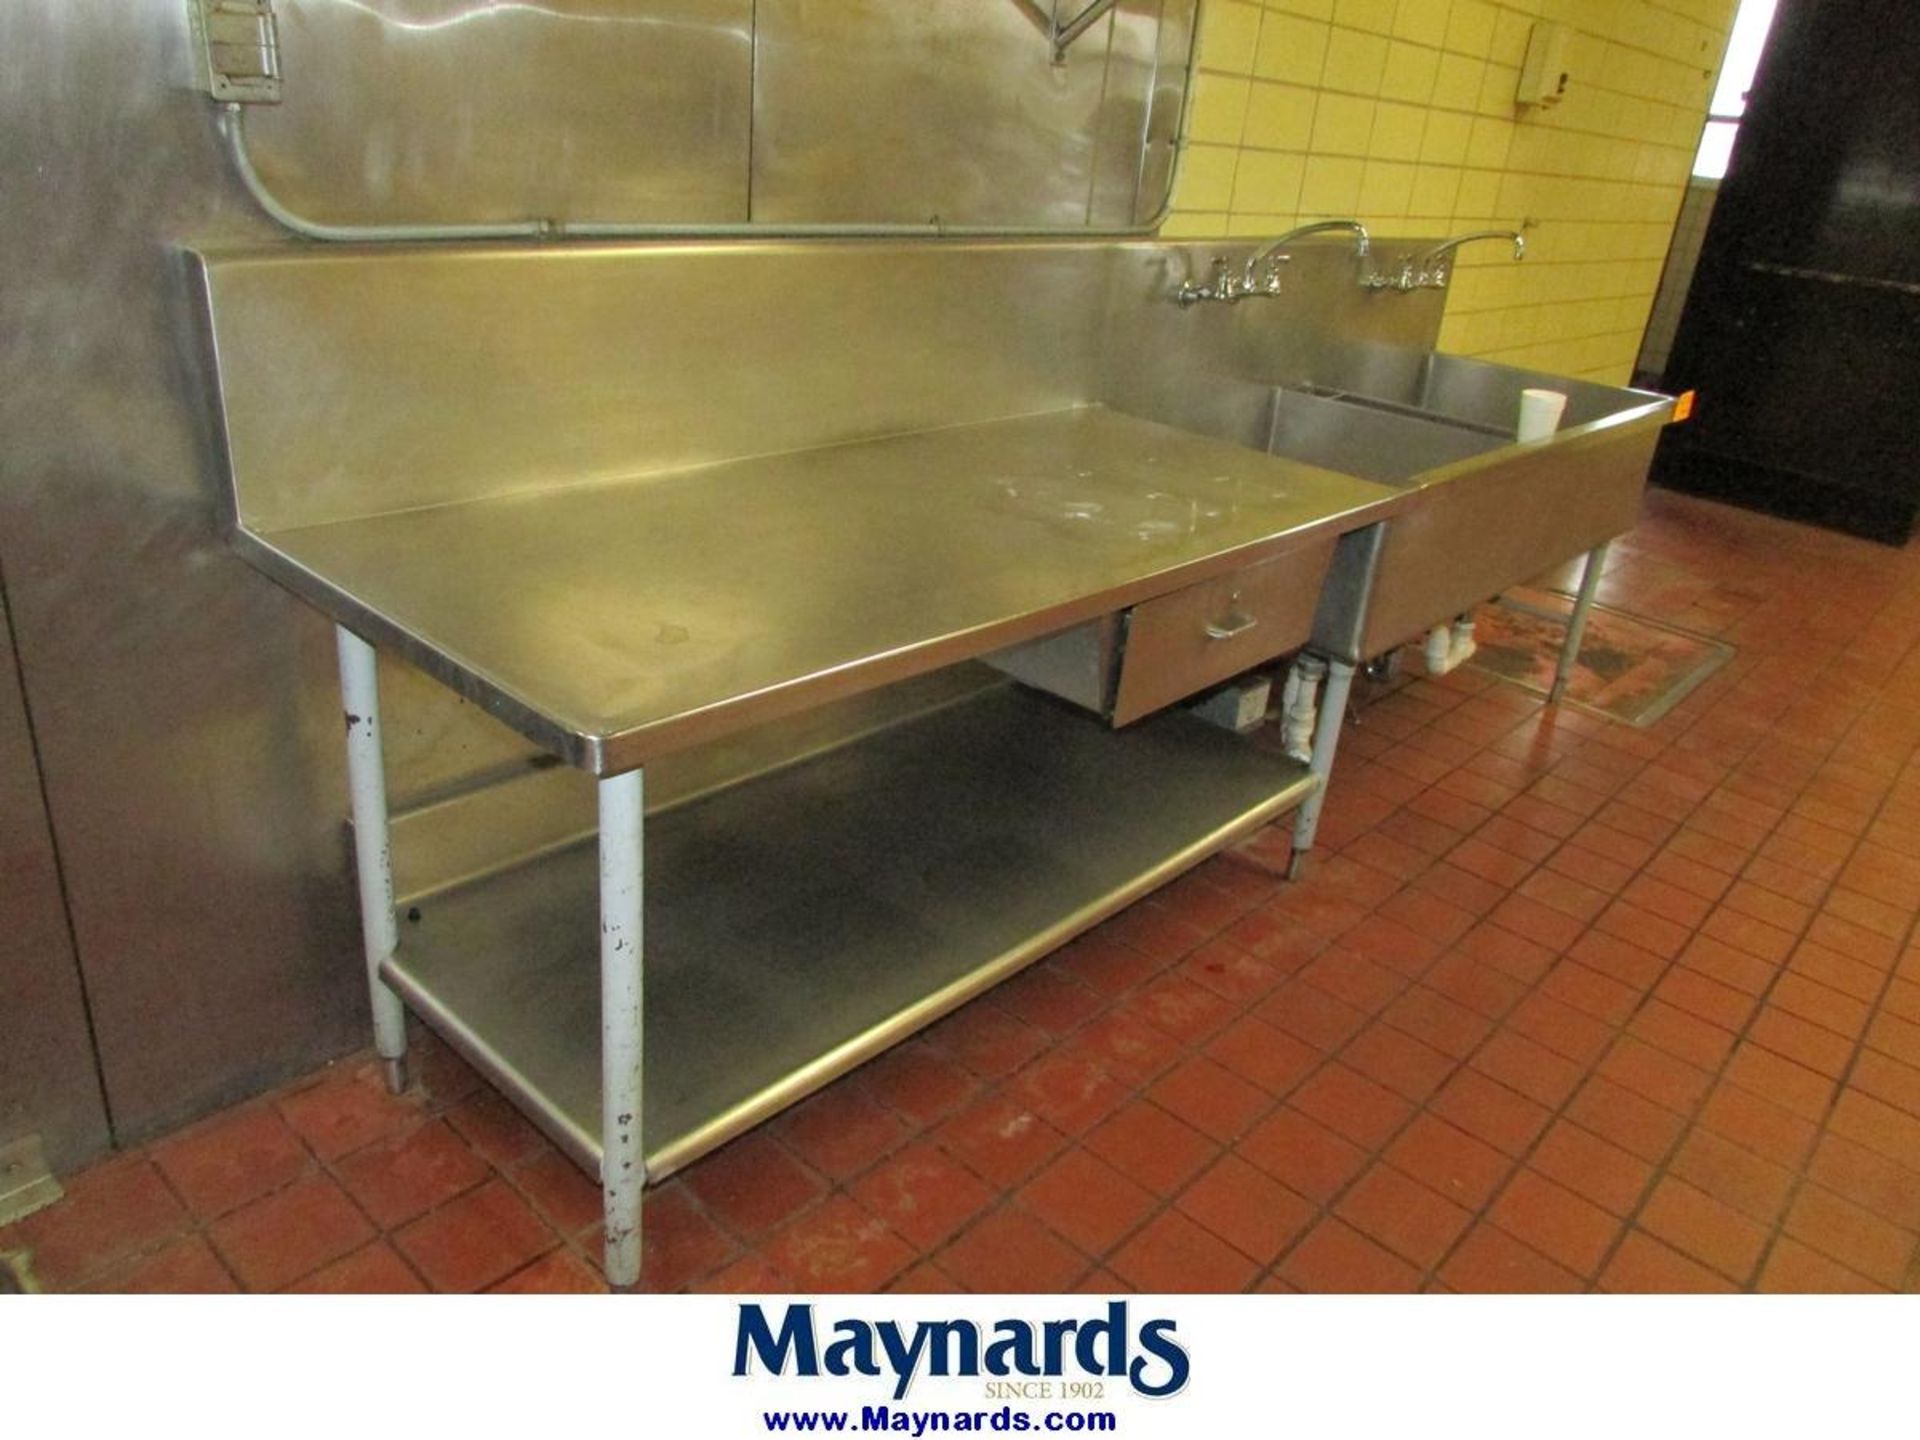 132"x28" Stainless Steel Commercial Dual Basin Kitchen Sink and Counter - Image 3 of 3